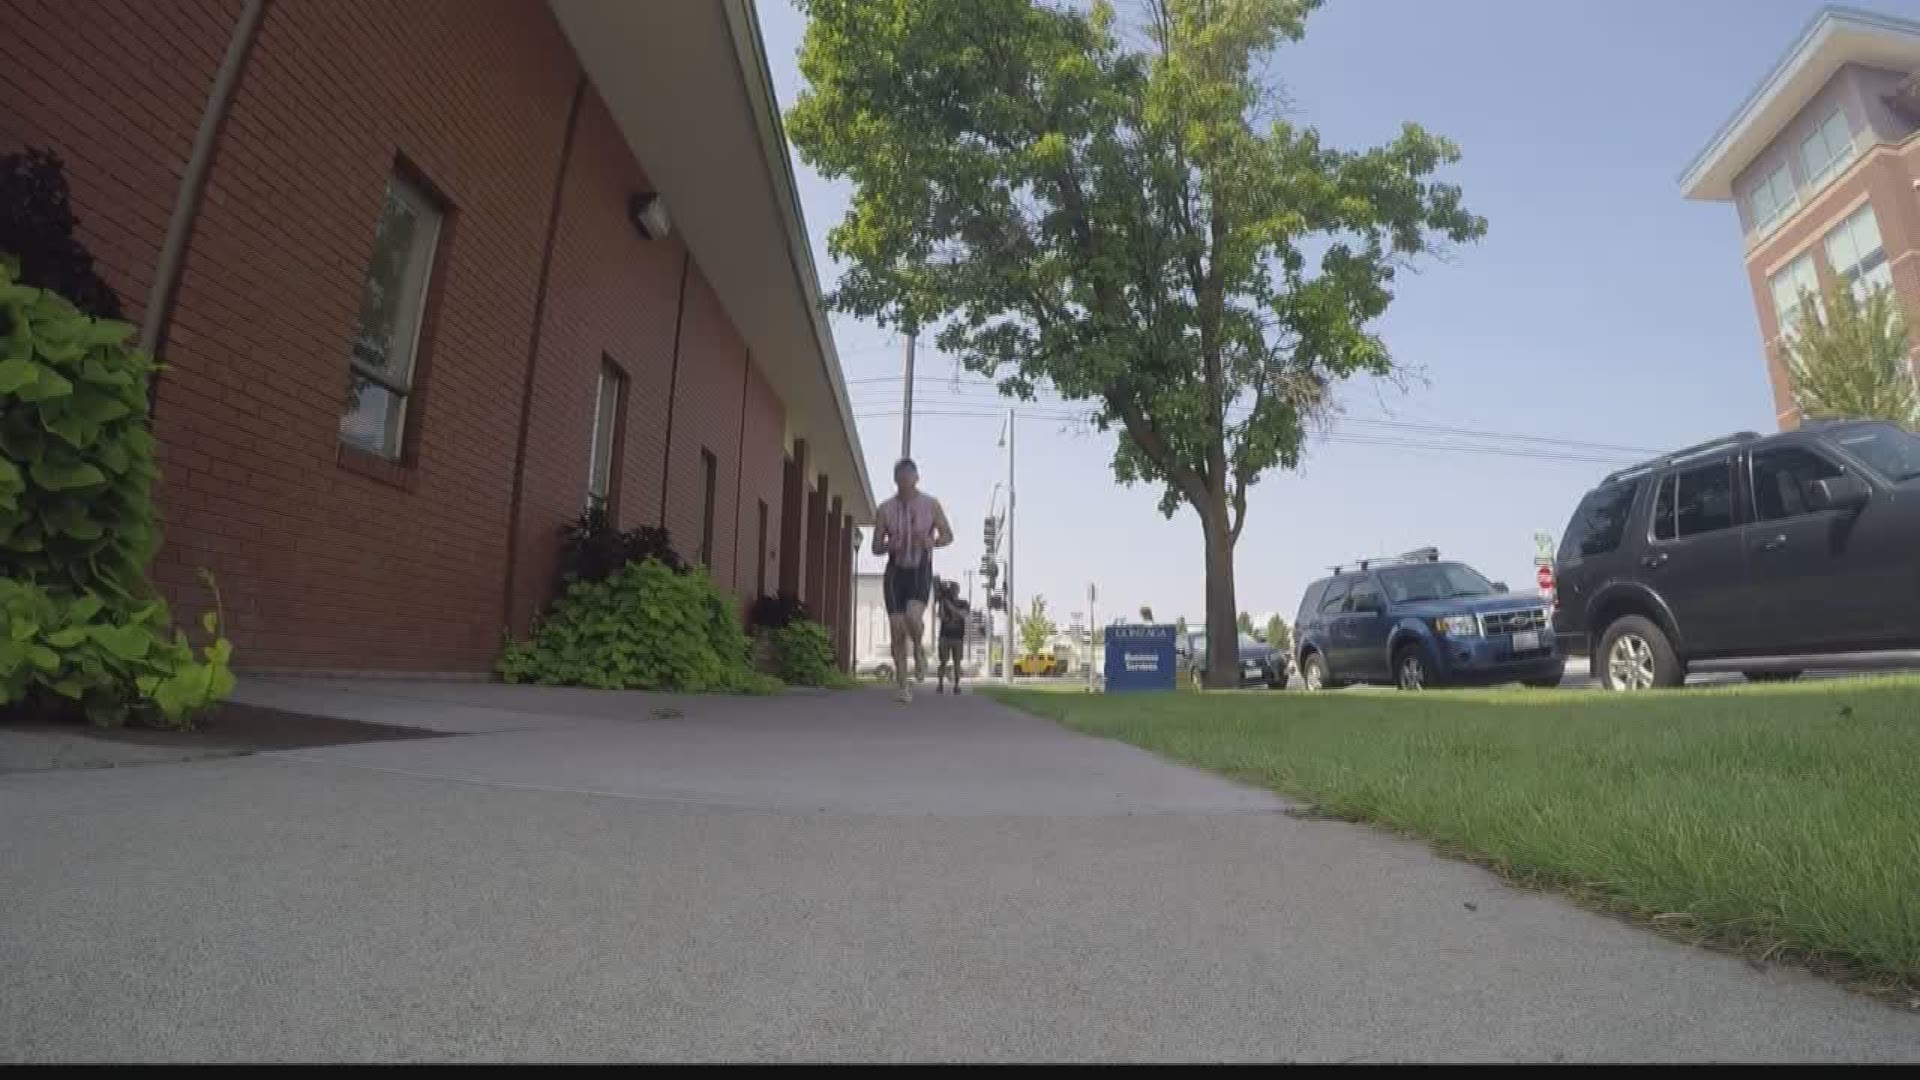 KREM 2's Jane McCarthy meets a man who is recovering from an injury, competing in Ironman Sunday and only signed up a week before the triathlon.